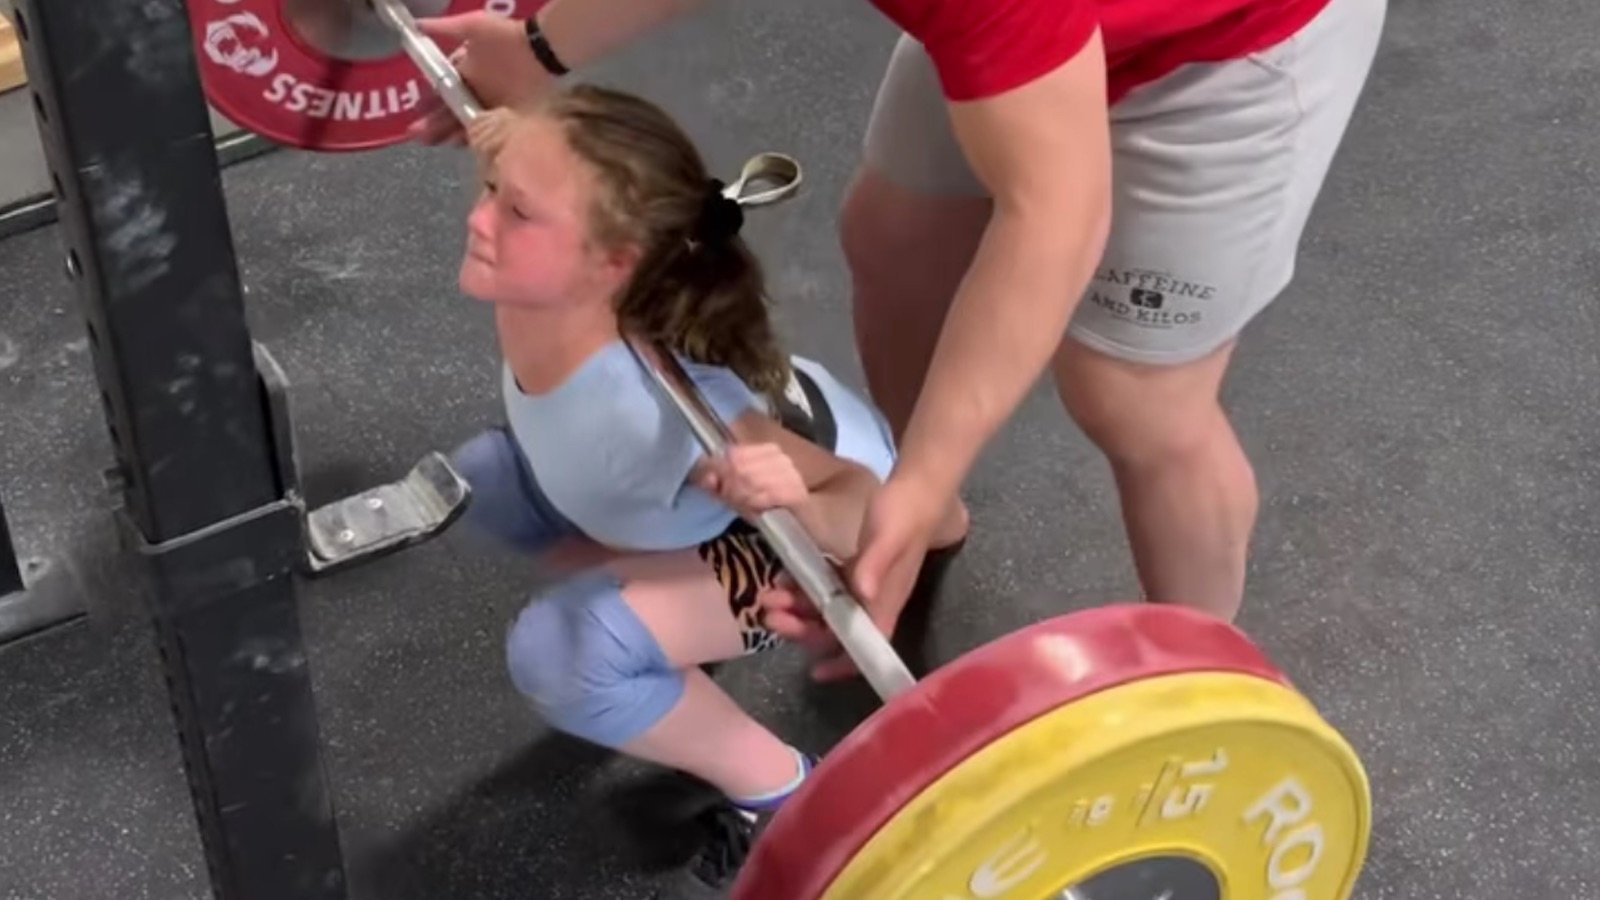 10-year-old-rory-van-ulft-reaches-new-milestone-squatting-triple-her-body-weight-–-breaking-muscle